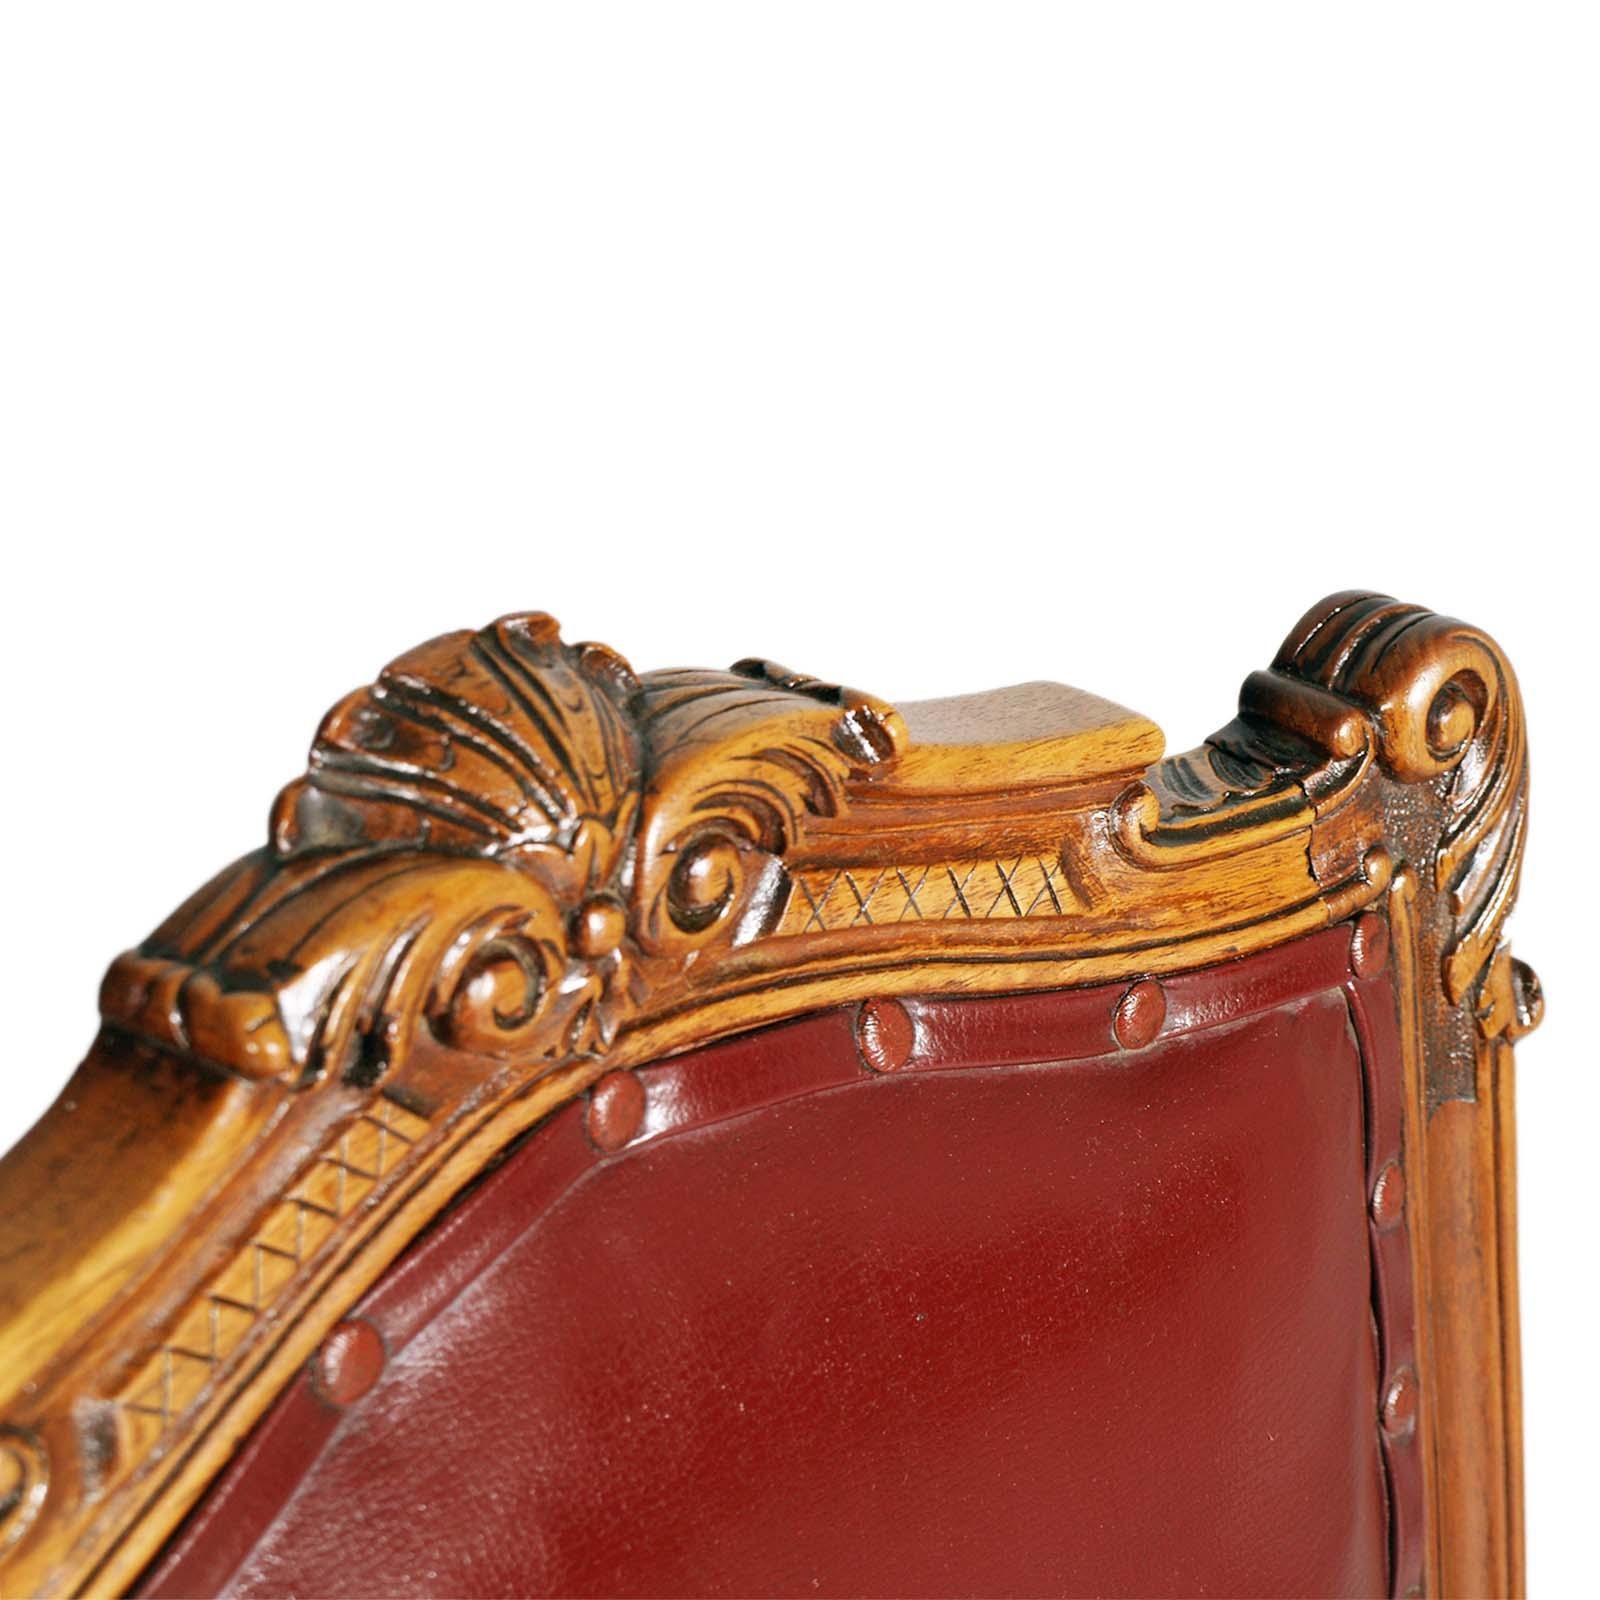 1880s Italian Chairs Neoclassic Eclectic Hand Carved Walnut Leather Upholstered For Sale 5